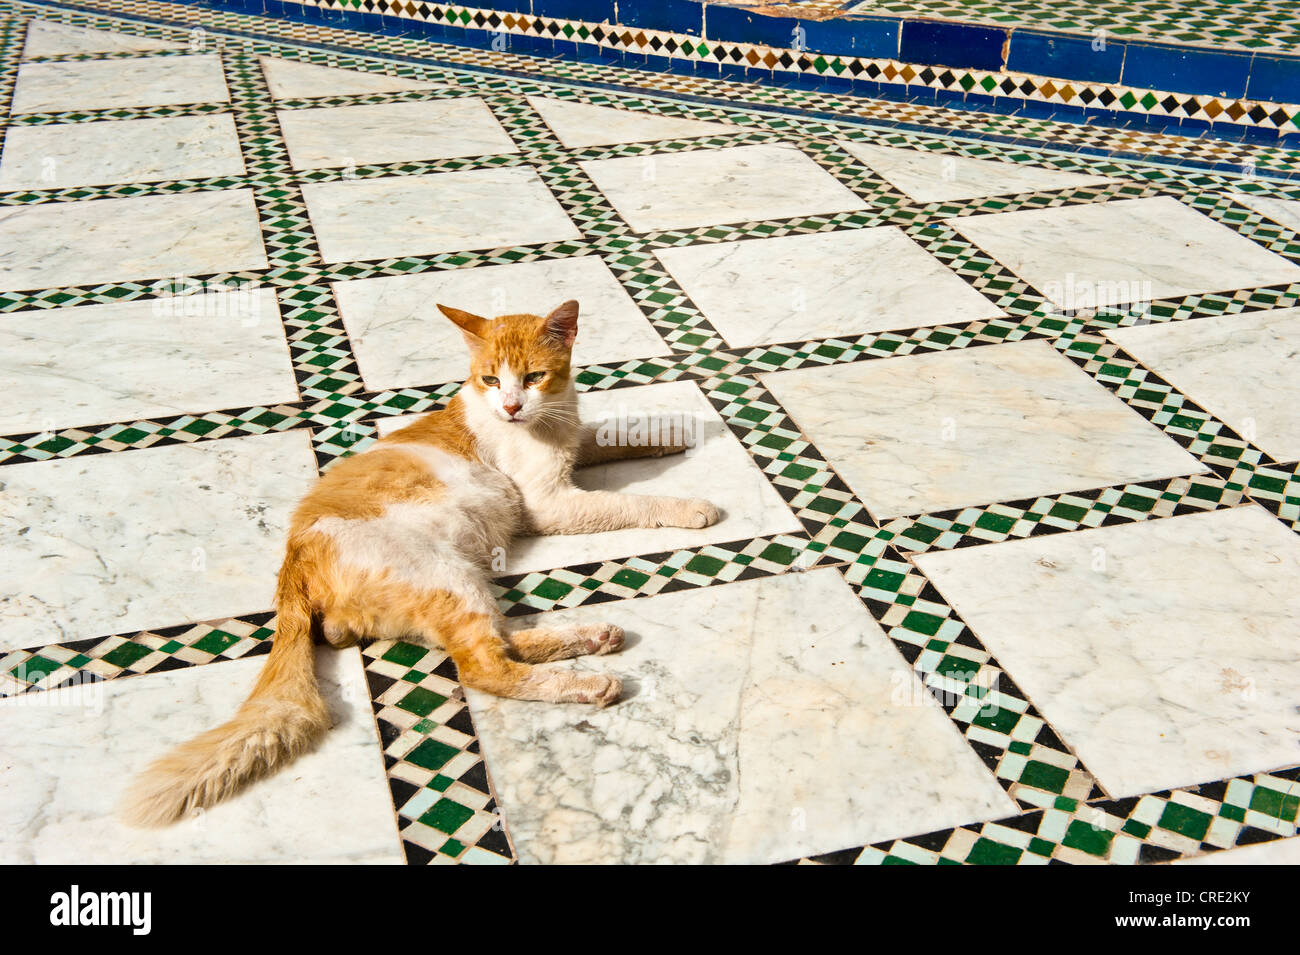 Cat sitting on a floor with zellige mosaic tiles, Bahia Palace, Marrakech, Morocco, Africa Stock Photo